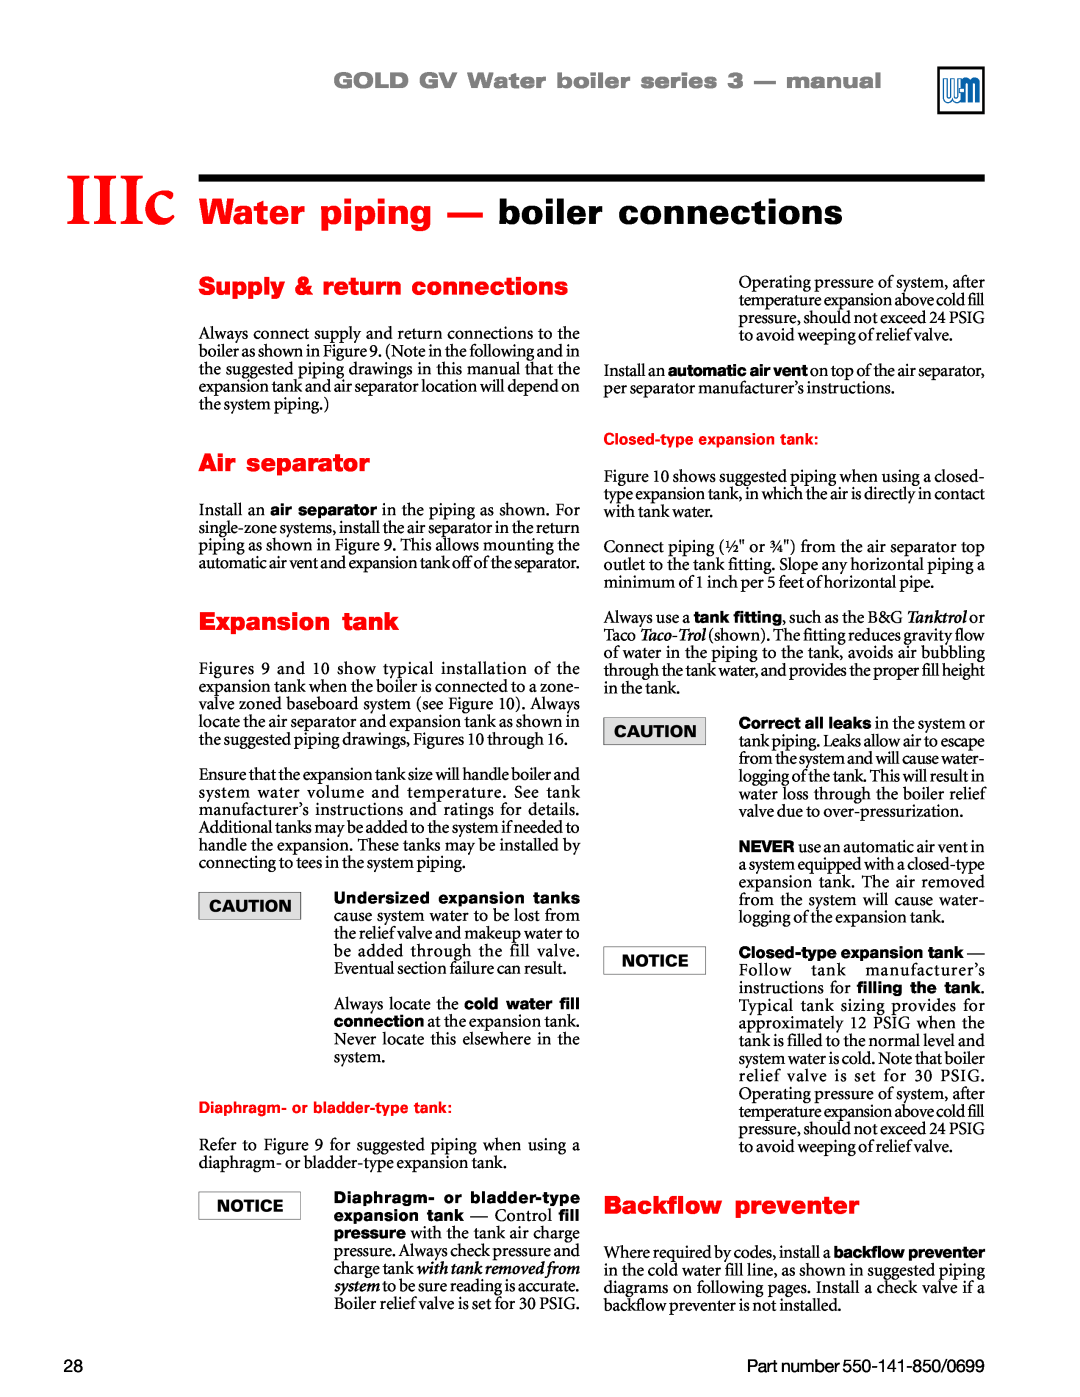 Weil-McLain GOLD DV WATER BOILER manual IIIc Water piping — boiler connections, Supply & return connections, Air separator 